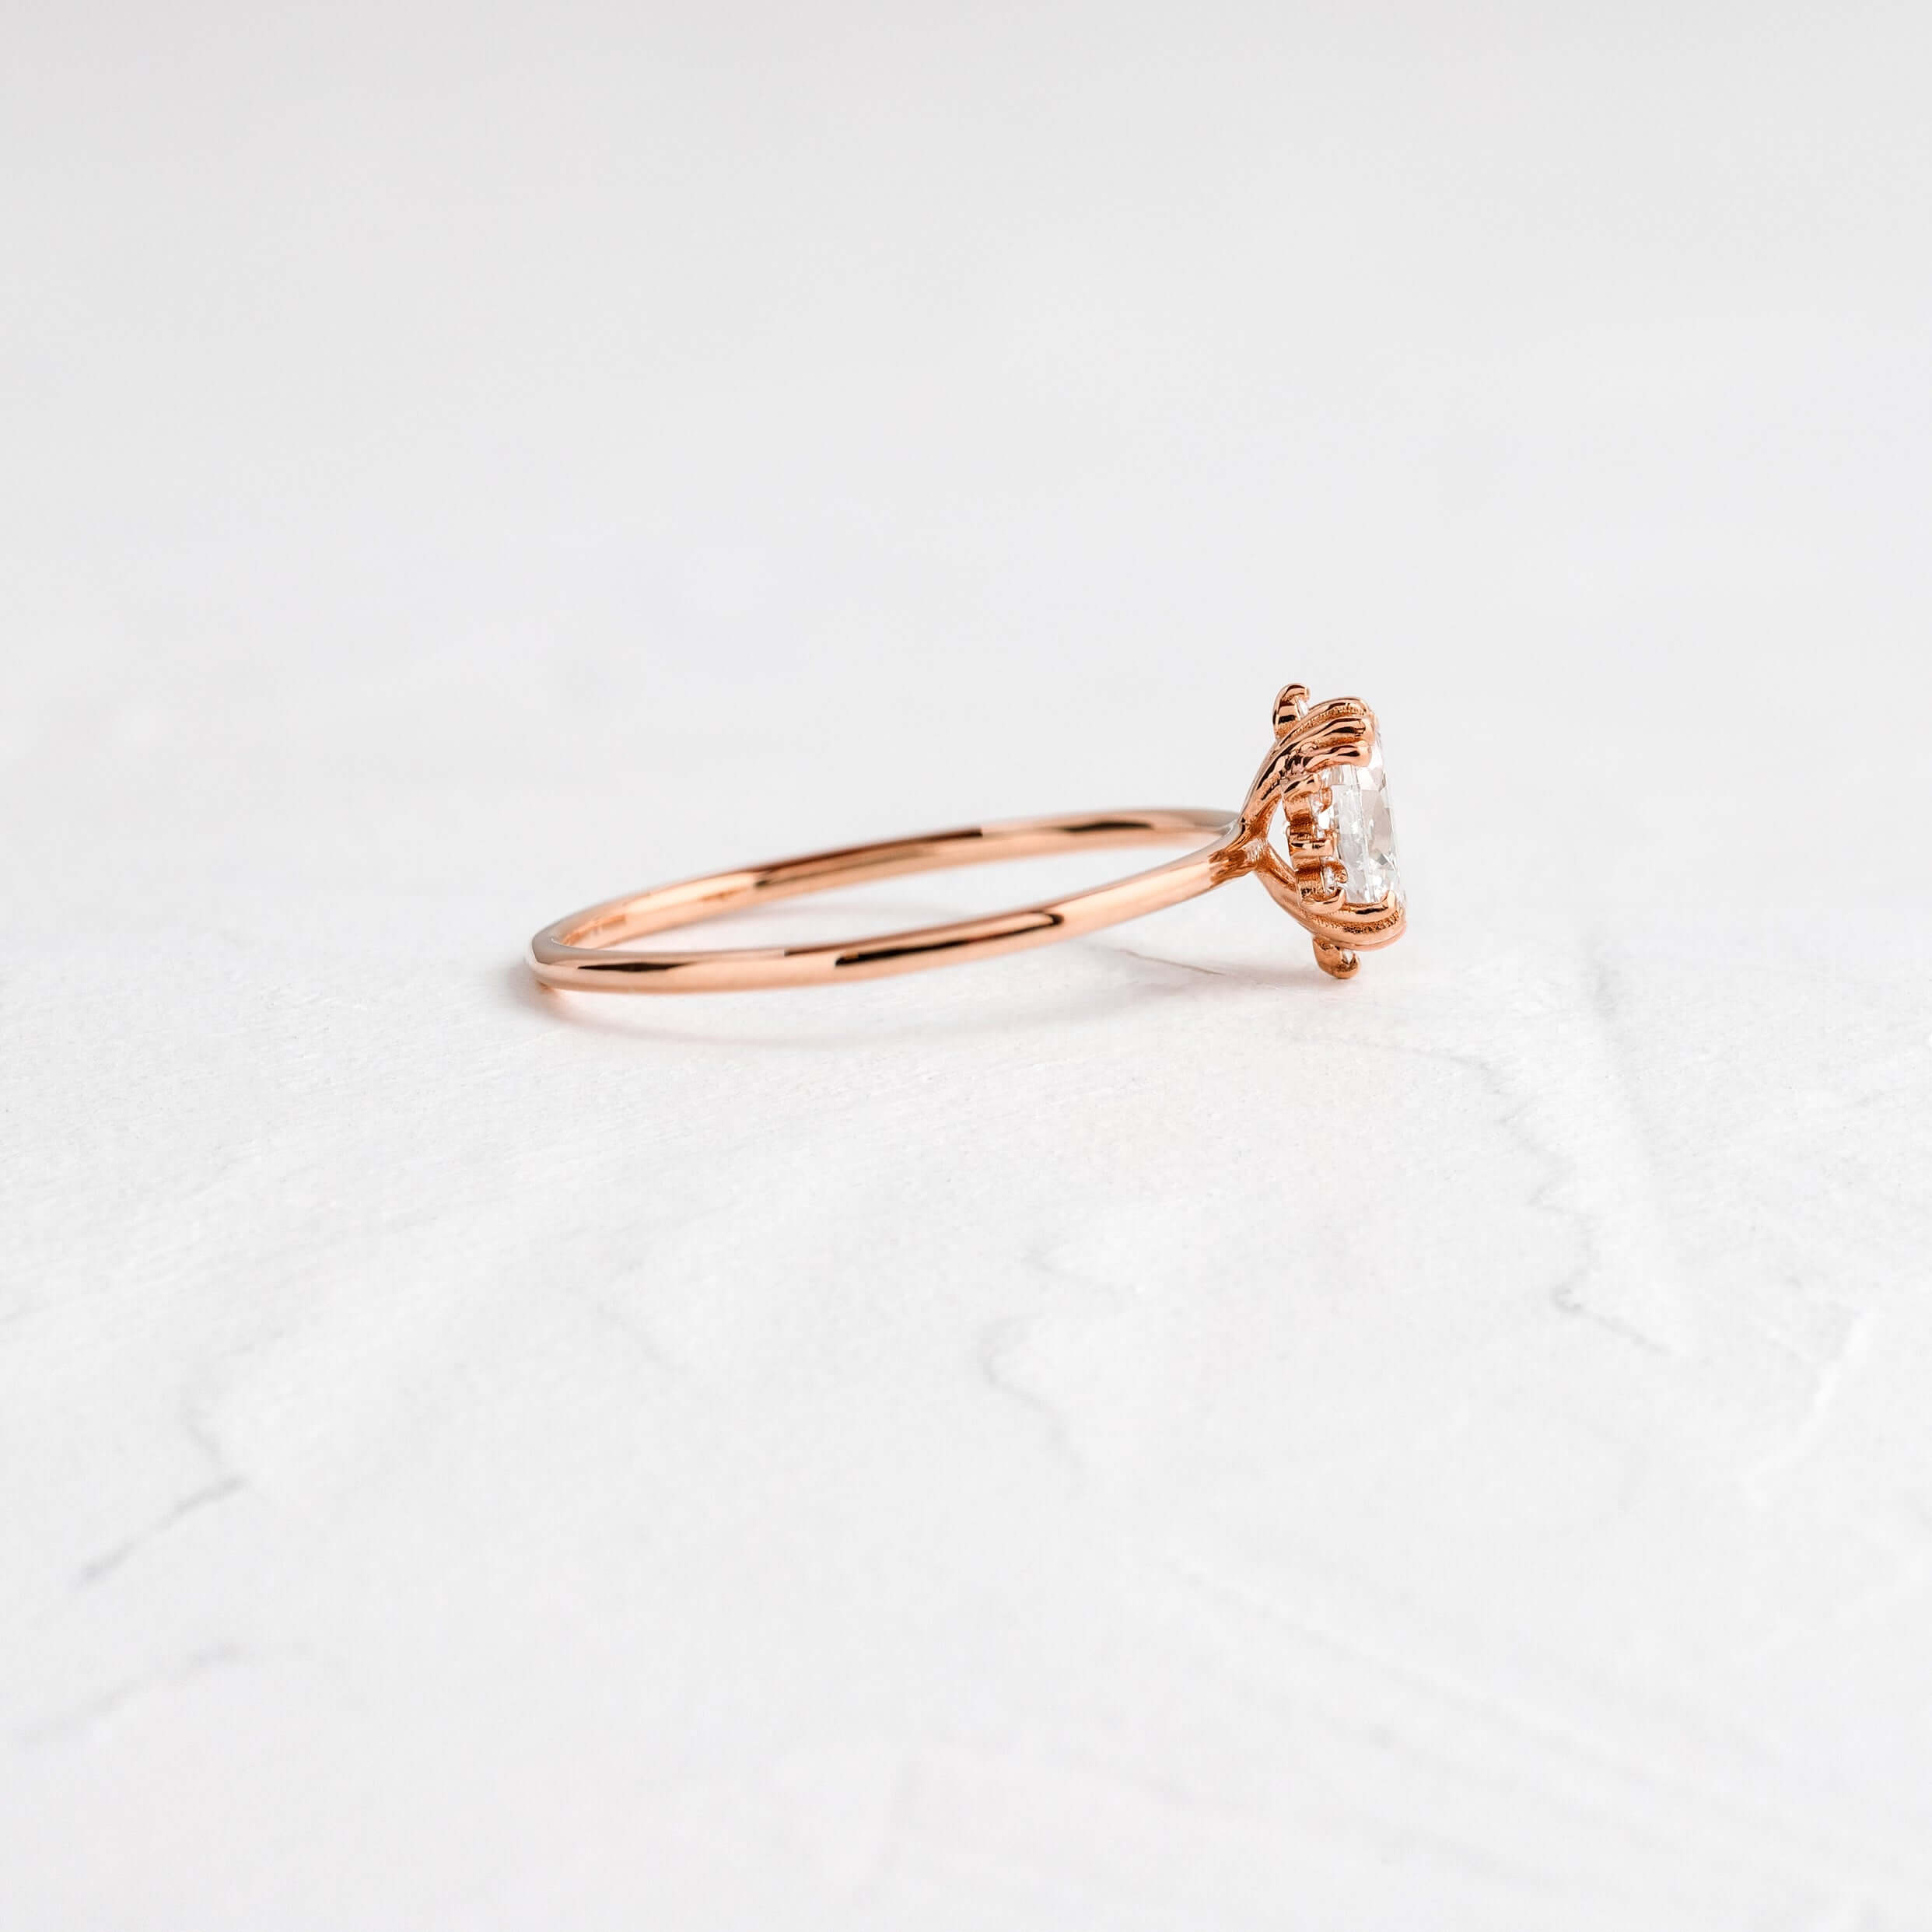 Silicone Makes for the Perfect Travel Engagement Ring | QALO